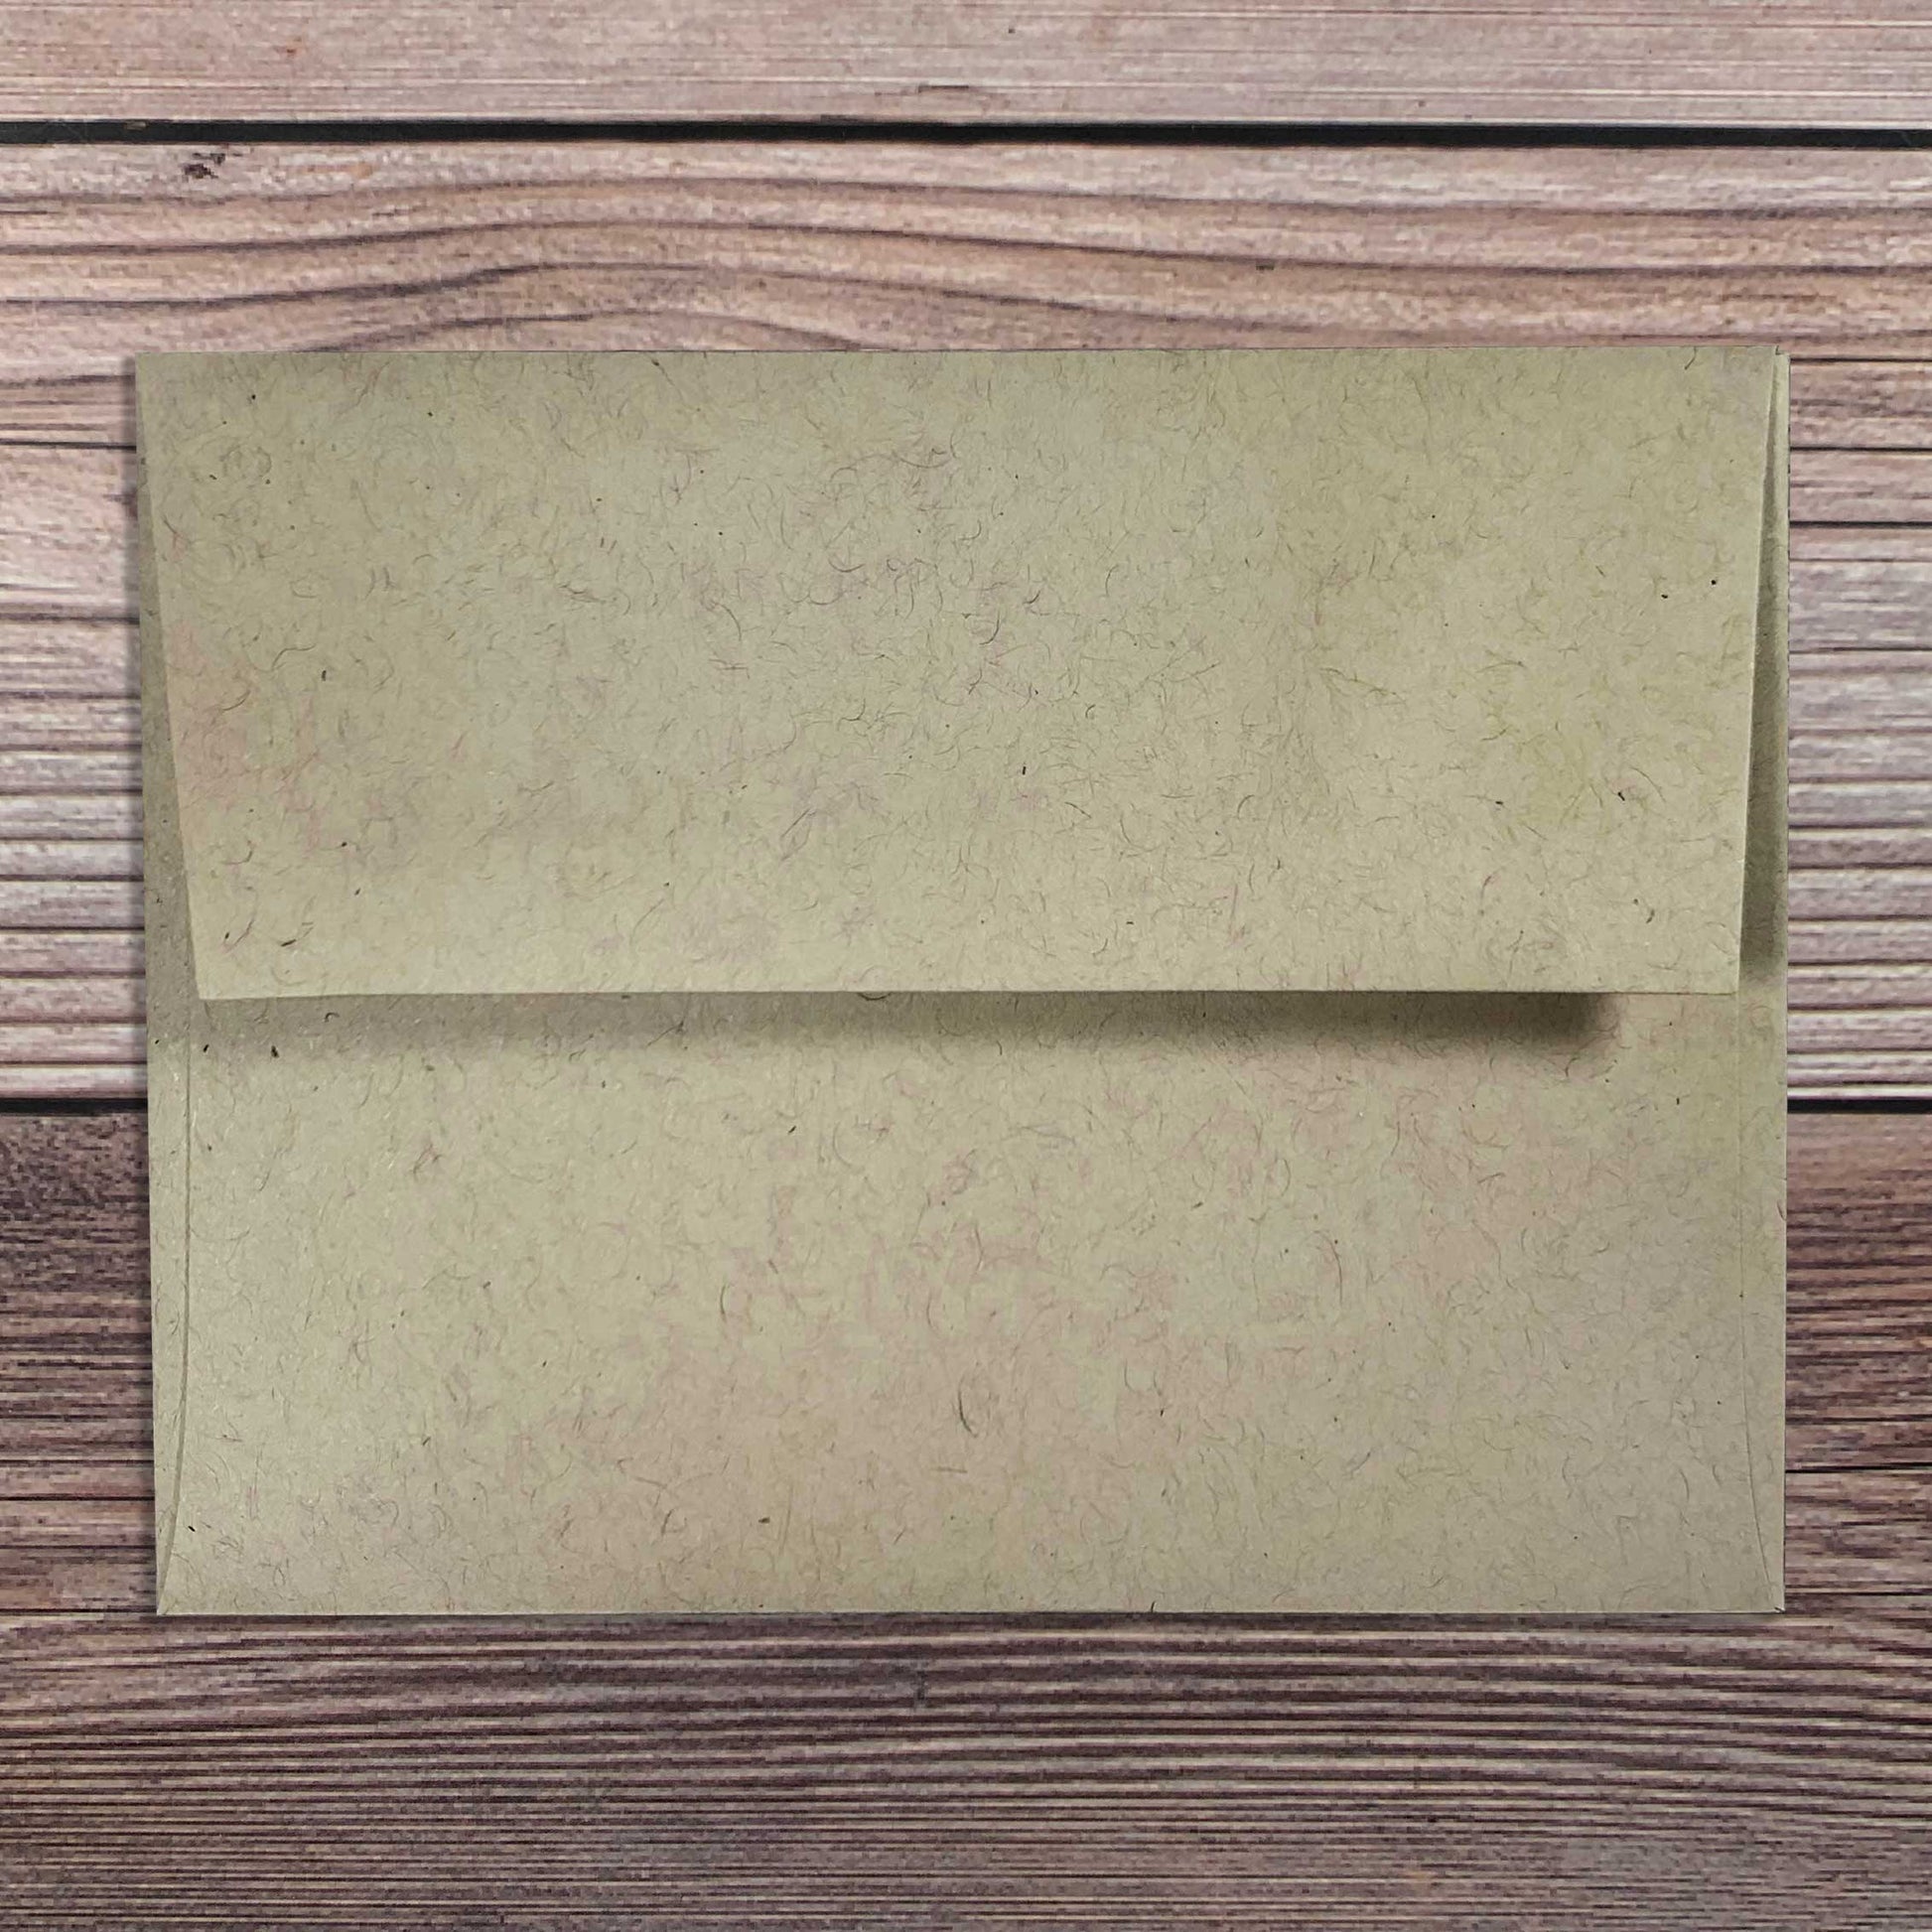 Greeting Card envelope, kraft color, square flap, included with letterpress apology greeting card.